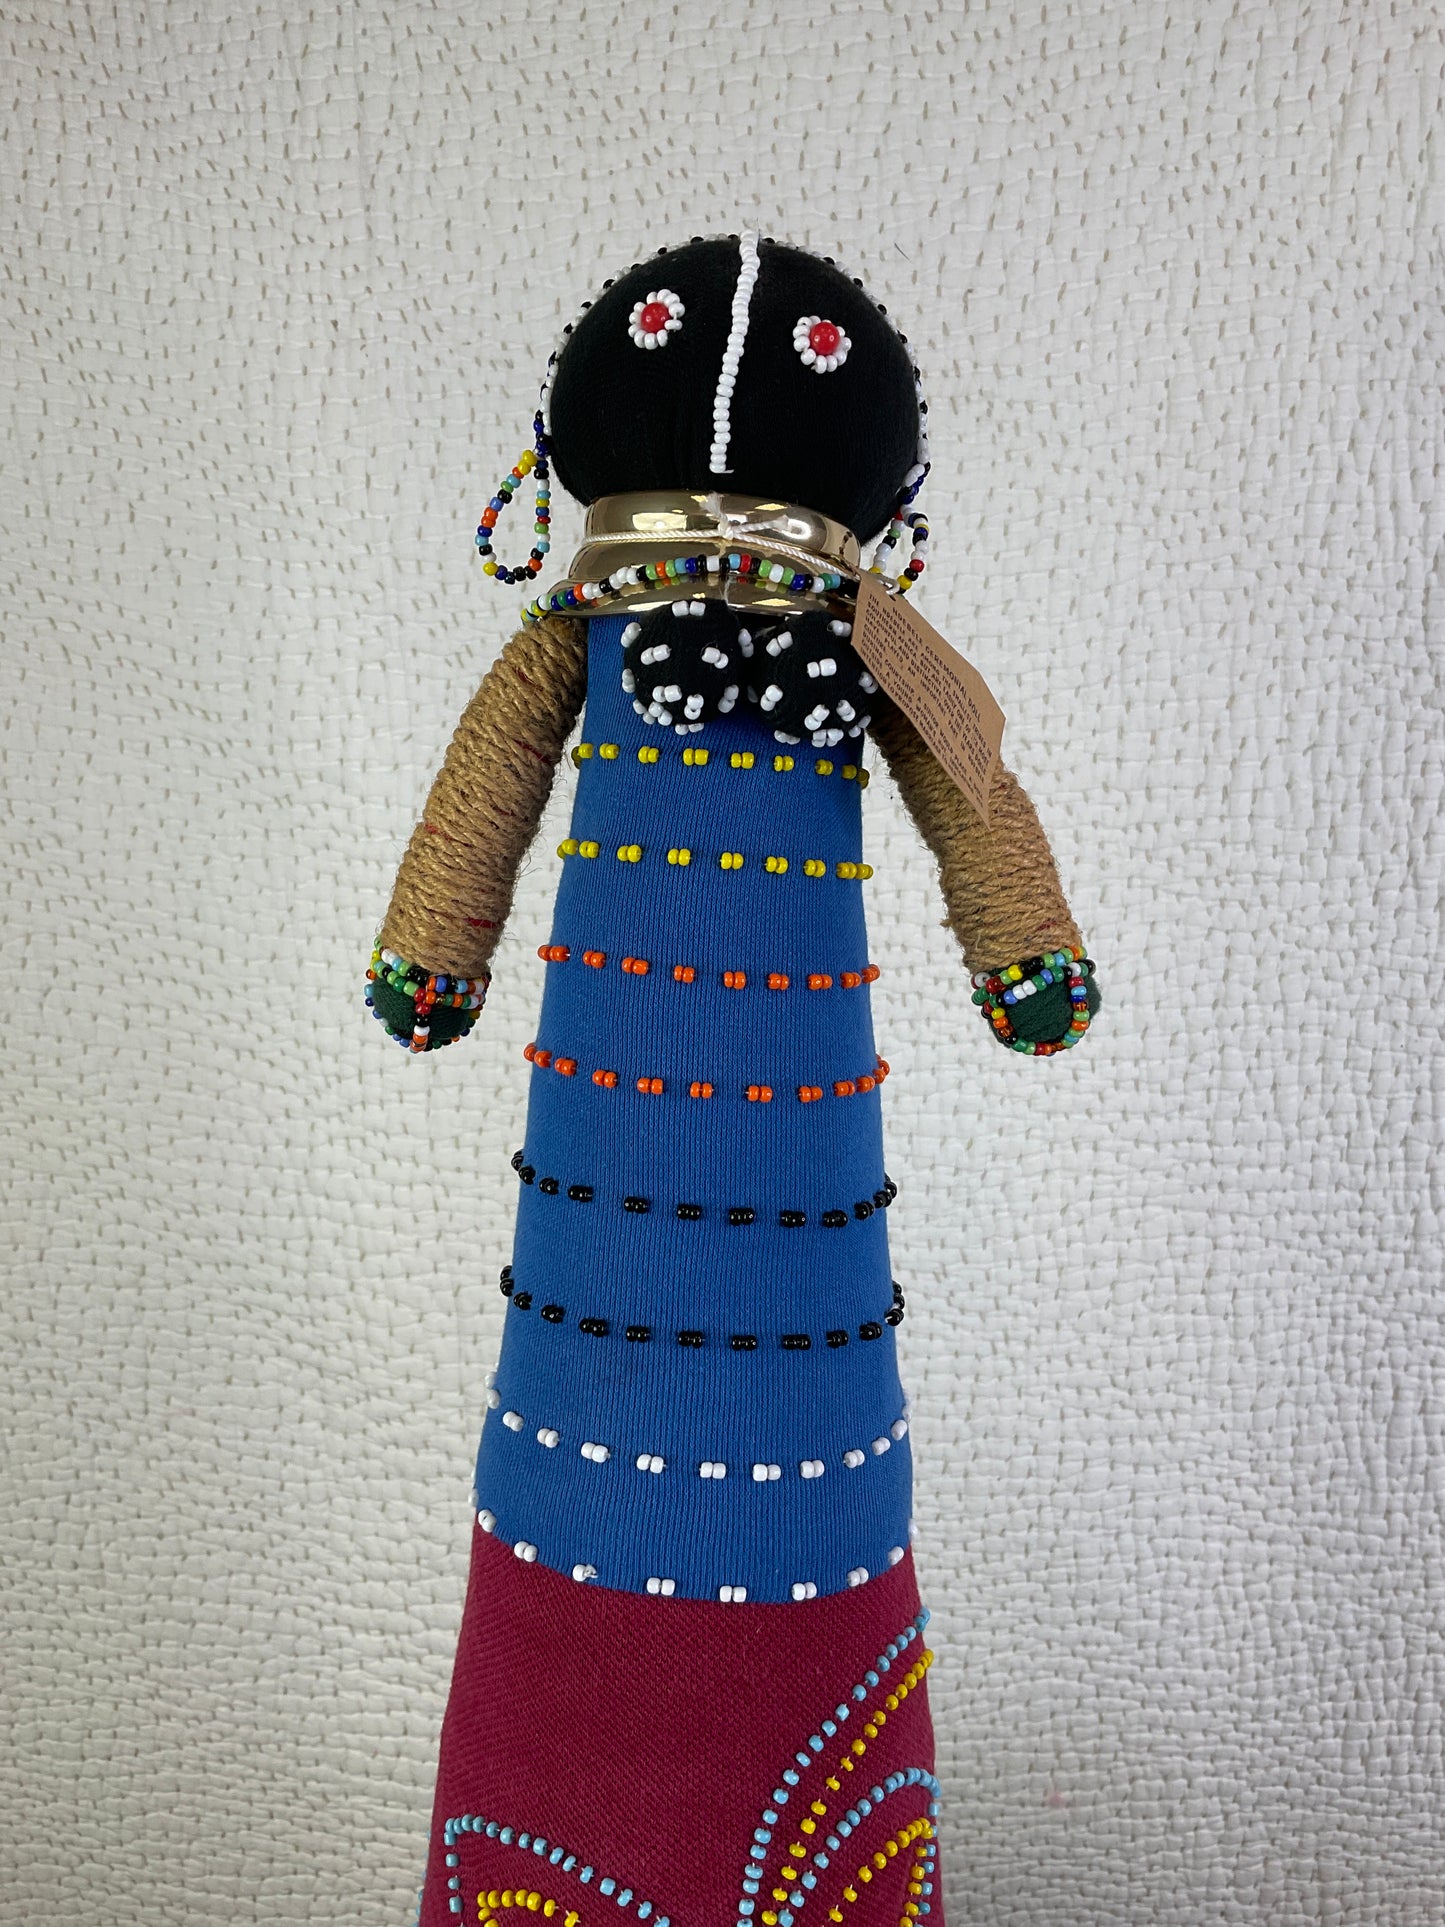 Ndebele Ceremonial / Courtship Doll, South Africa,  Sold Separately